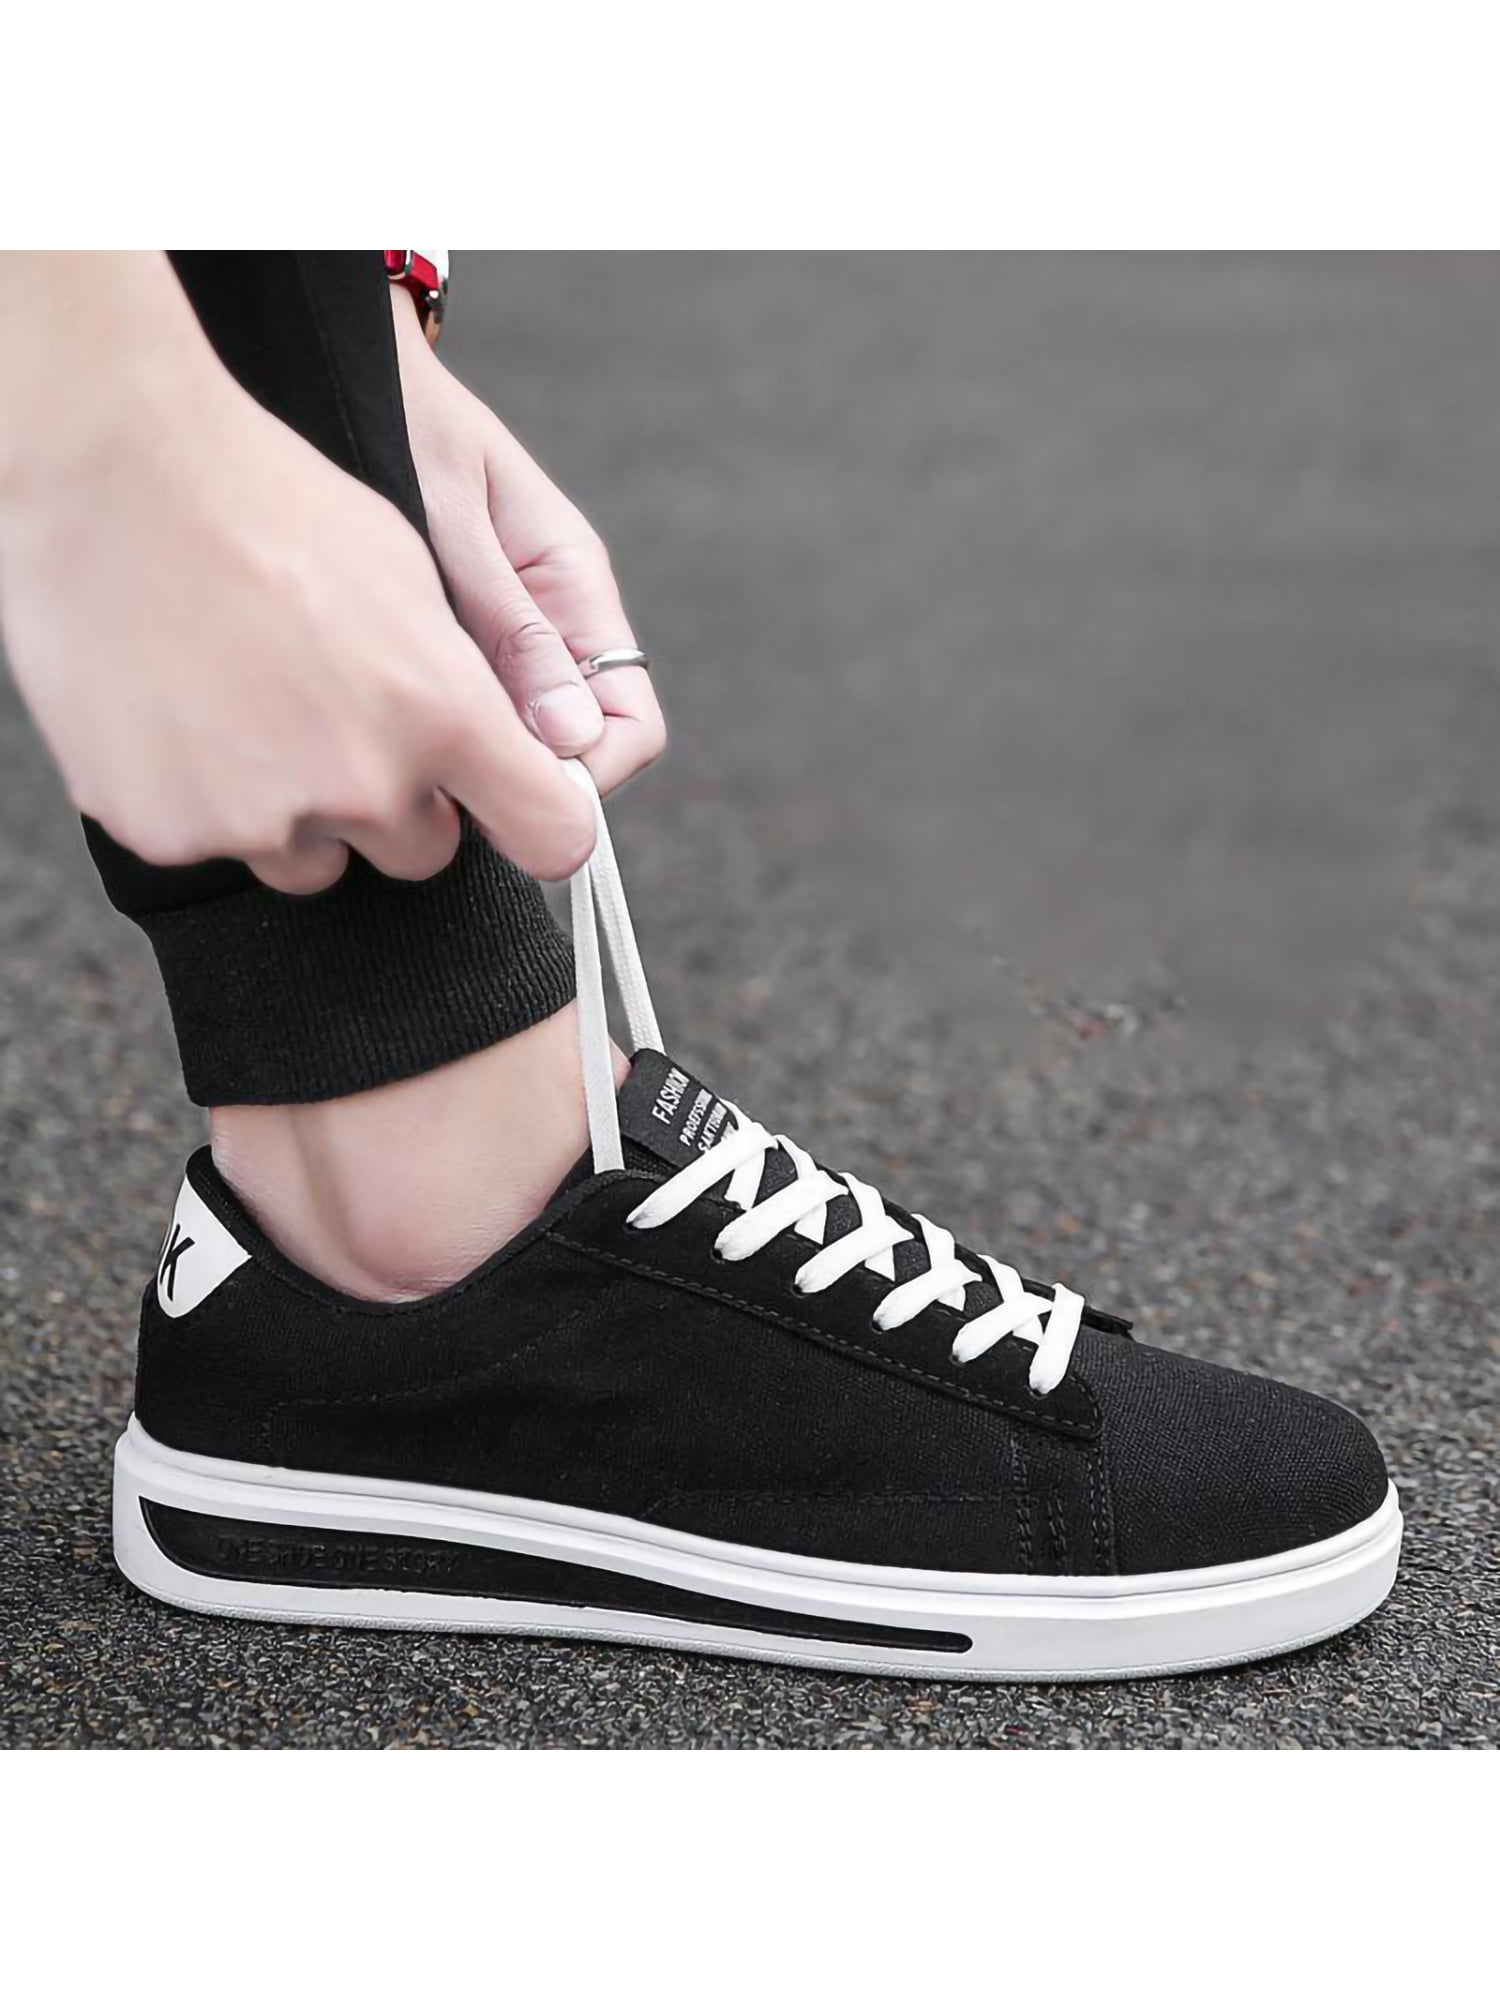 New Womens Ladies Girls Flat Canvas Mules Trainers Lace Up Plimsolls Pumps Shoes 